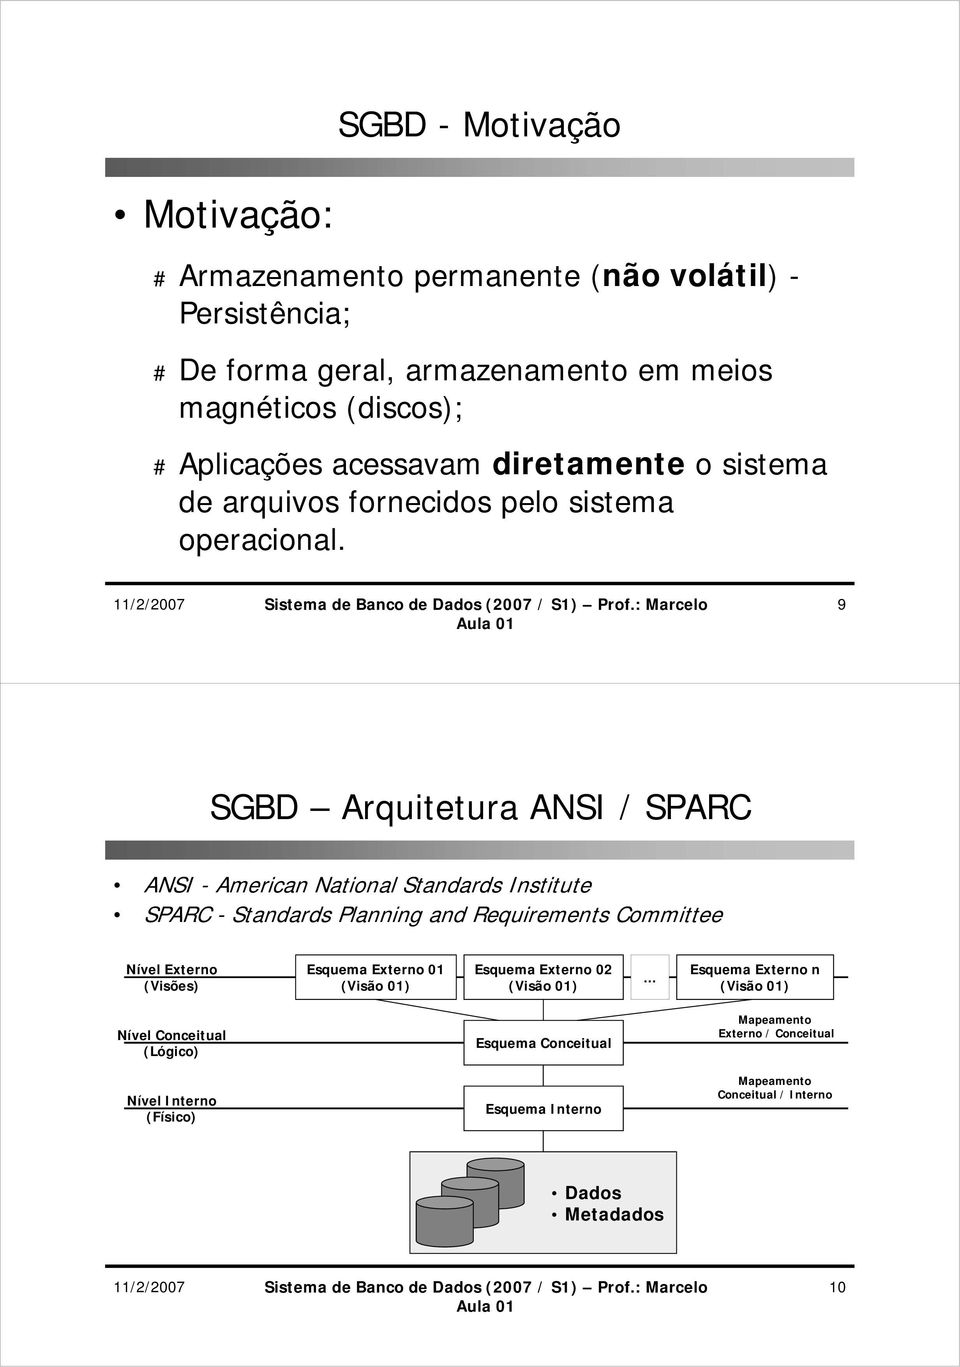 9 SGBD Arquitetura ANSI / SPARC ANSI - American National Standards Institute SPARC - Standards Planning and Requirements Committee Nível Externo (Visões) Esquema